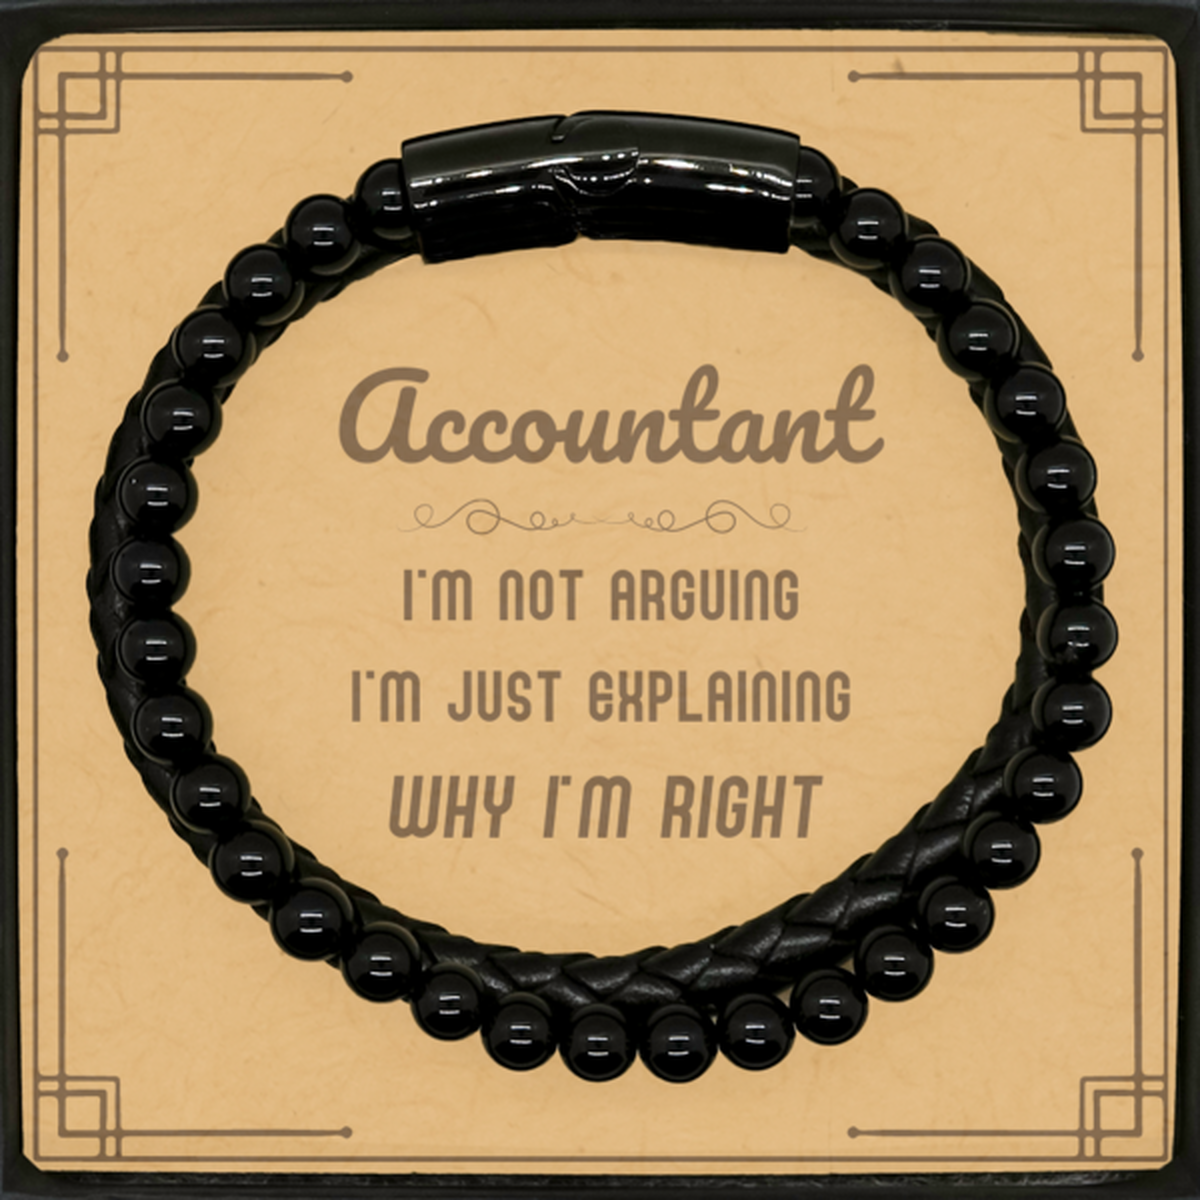 Accountant I'm not Arguing. I'm Just Explaining Why I'm RIGHT Stone Leather Bracelets, Funny Saying Quote Accountant Gifts For Accountant Message Card Graduation Birthday Christmas Gifts for Men Women Coworker